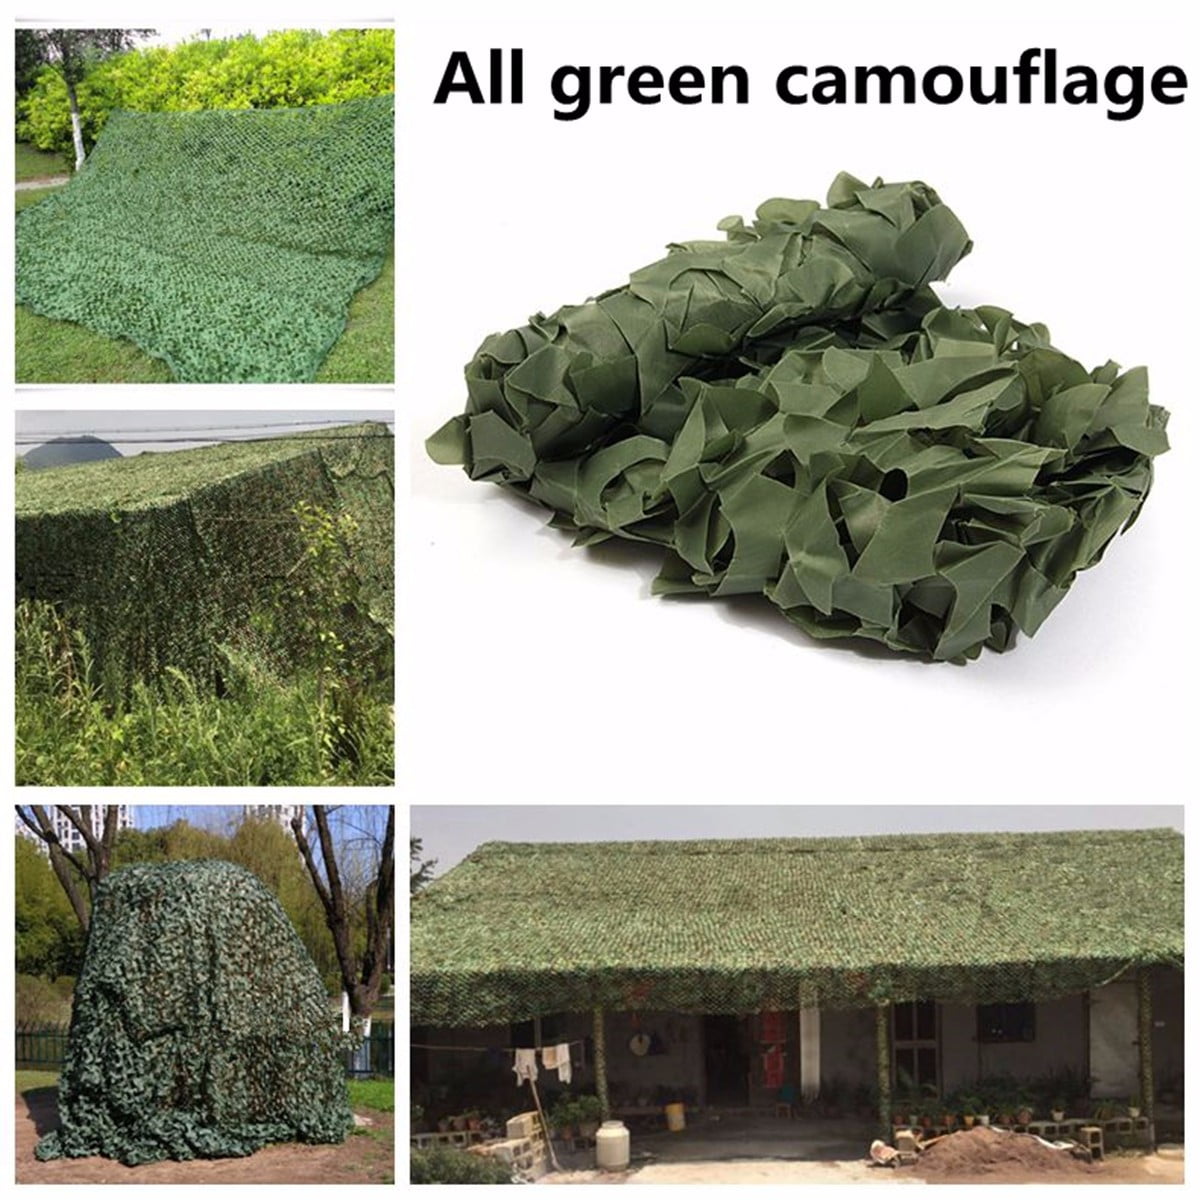 78 X78 Camo Net Camouflage Netting Woodland Shooting Hide Army Hunting Camp Camping Army Military Decoration Netting